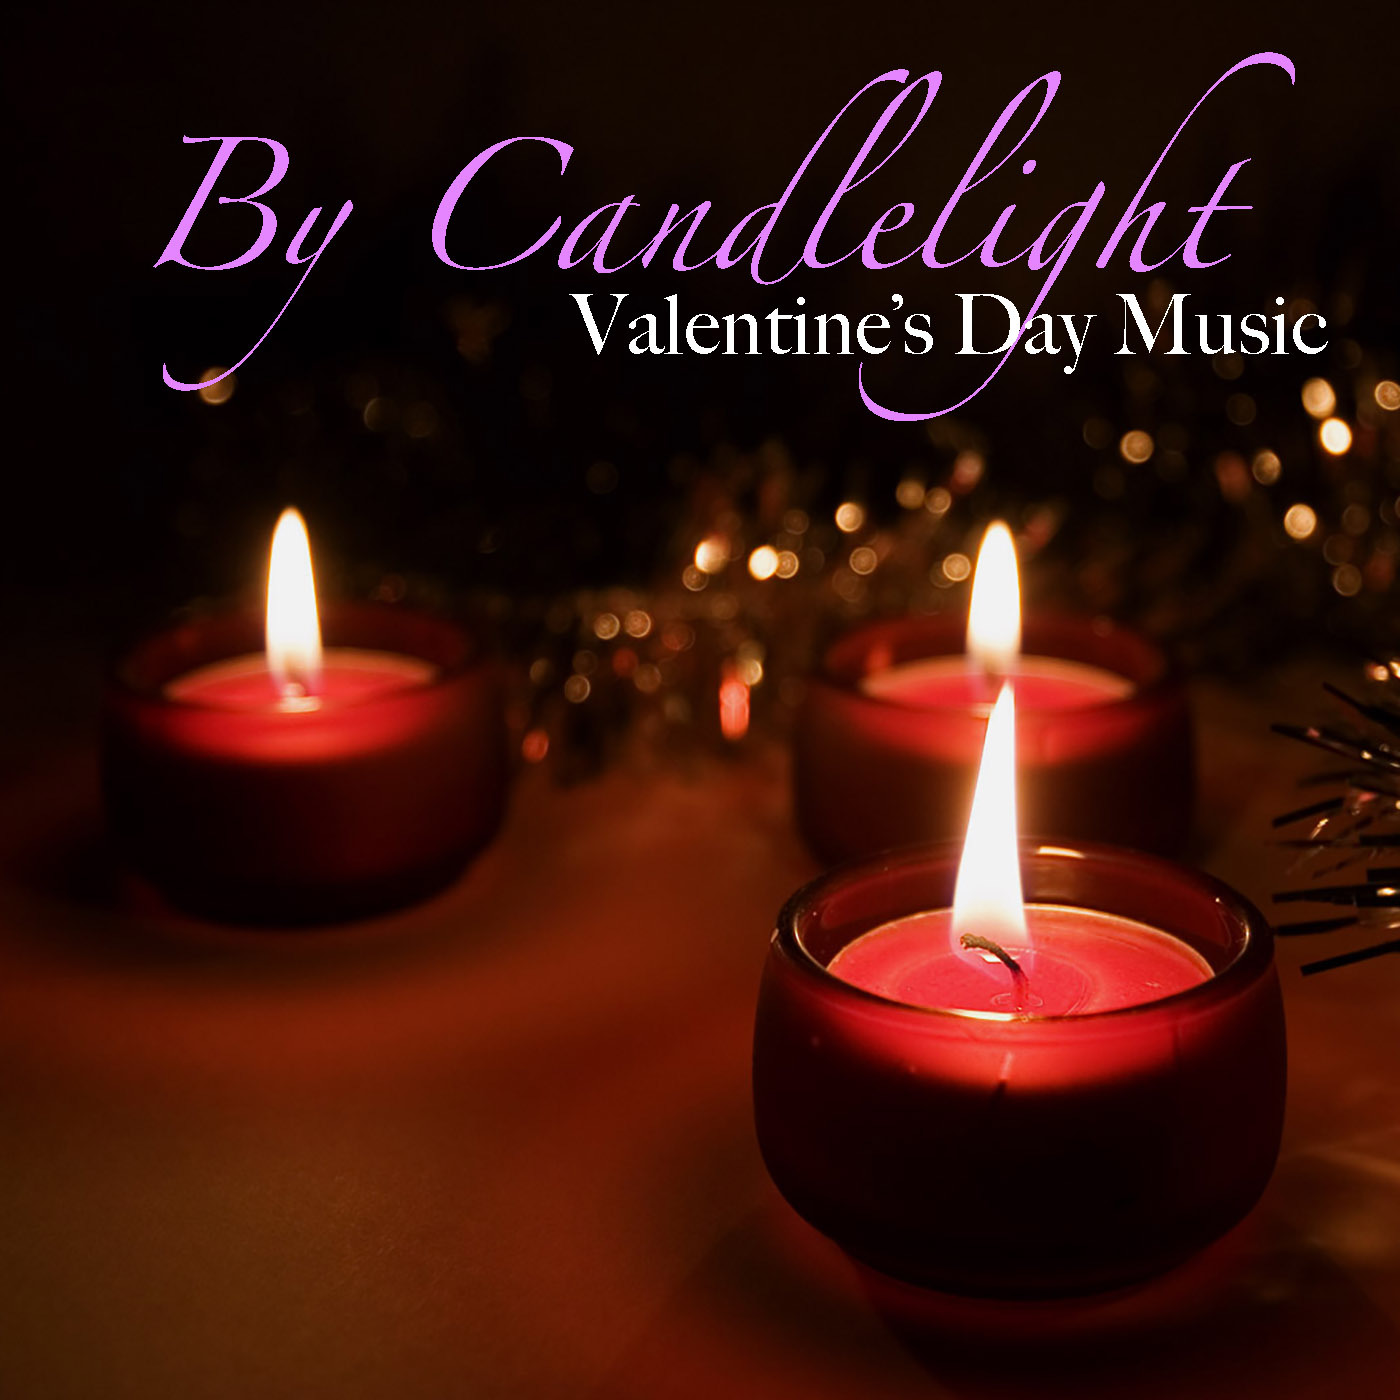 By Candlelight: Valentine's Day Music